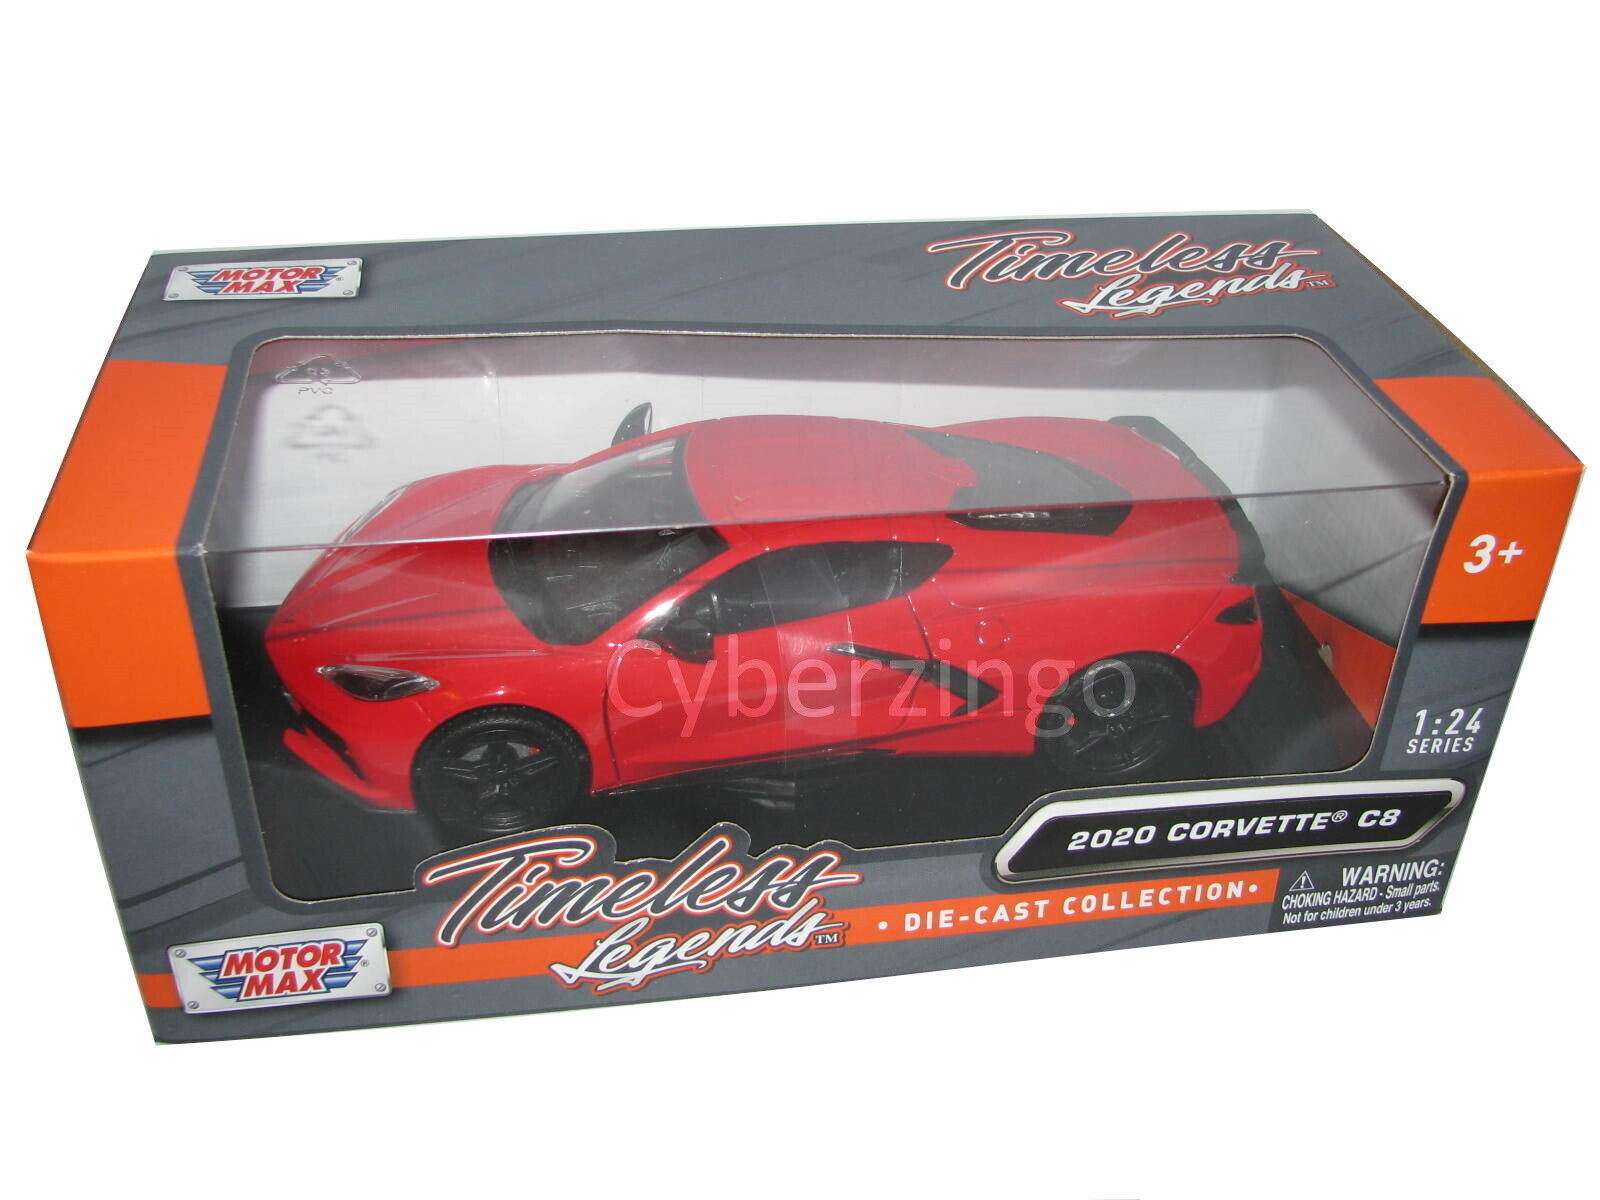 Primary image for 2020 Chevy Corvette Stingray Motormax 1:24 Scale Red Diecast Car NEW IN BOX